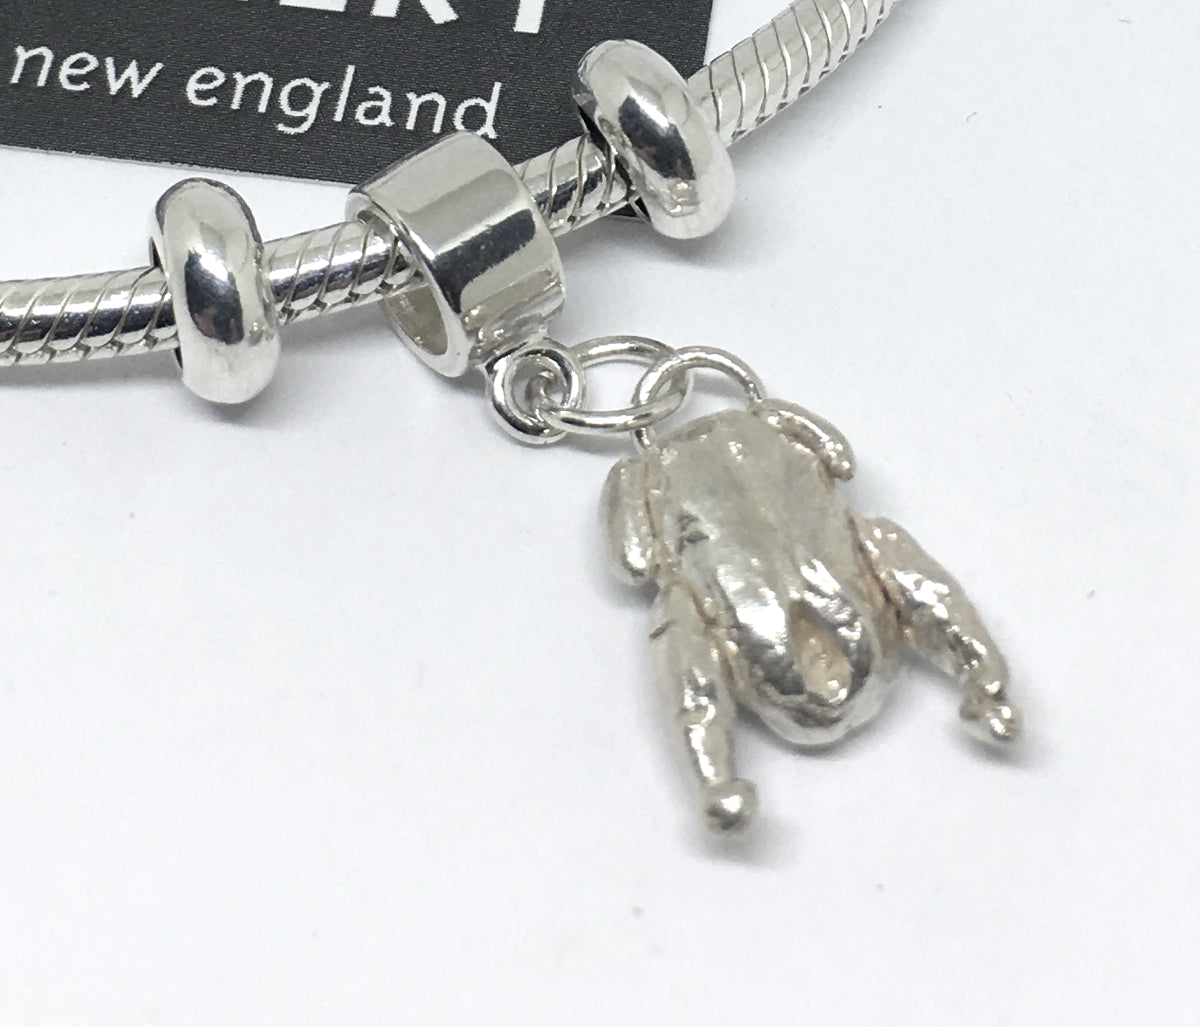 European Style Charm Bracelet with Sterling Silver Duck Charm